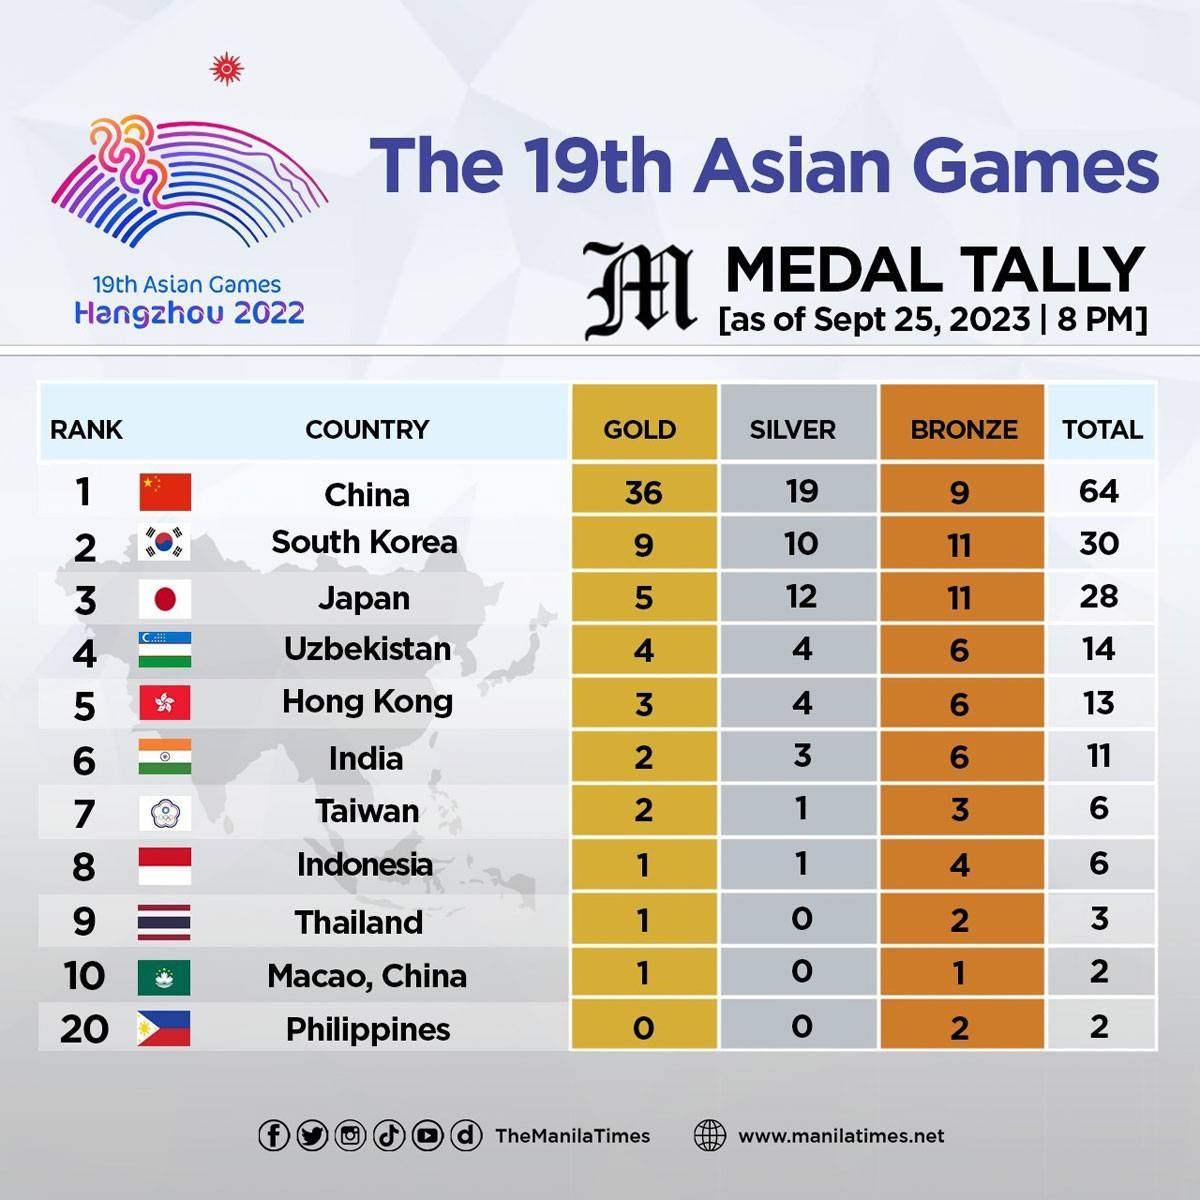 The 19th Asian Games medal tally as of Sept. 25, 2023 0800 PM The